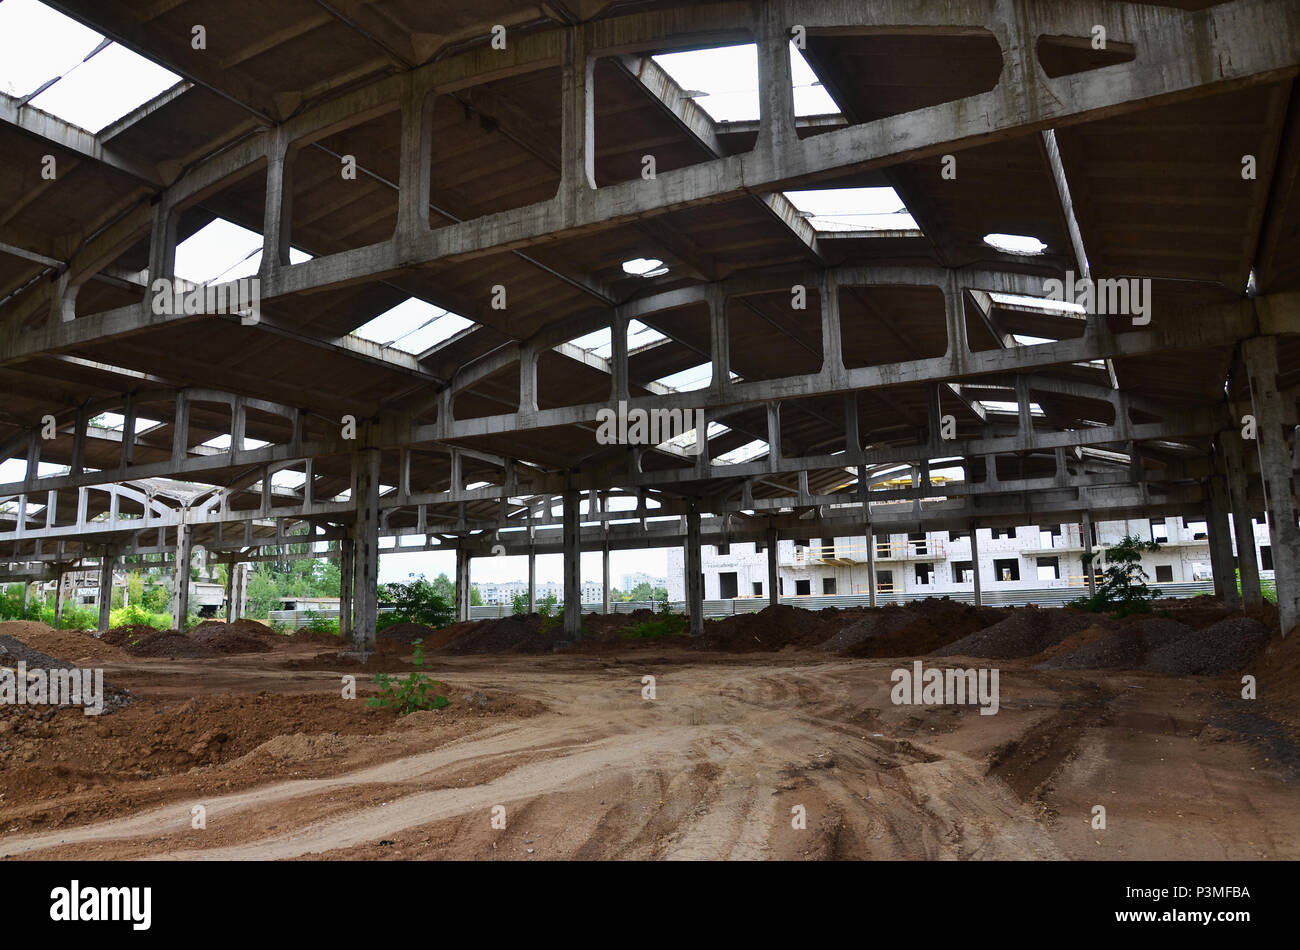 Landscape image of an abandoned industrial hangar with a damaged roof. Photo on wide-angle lens Stock Photo